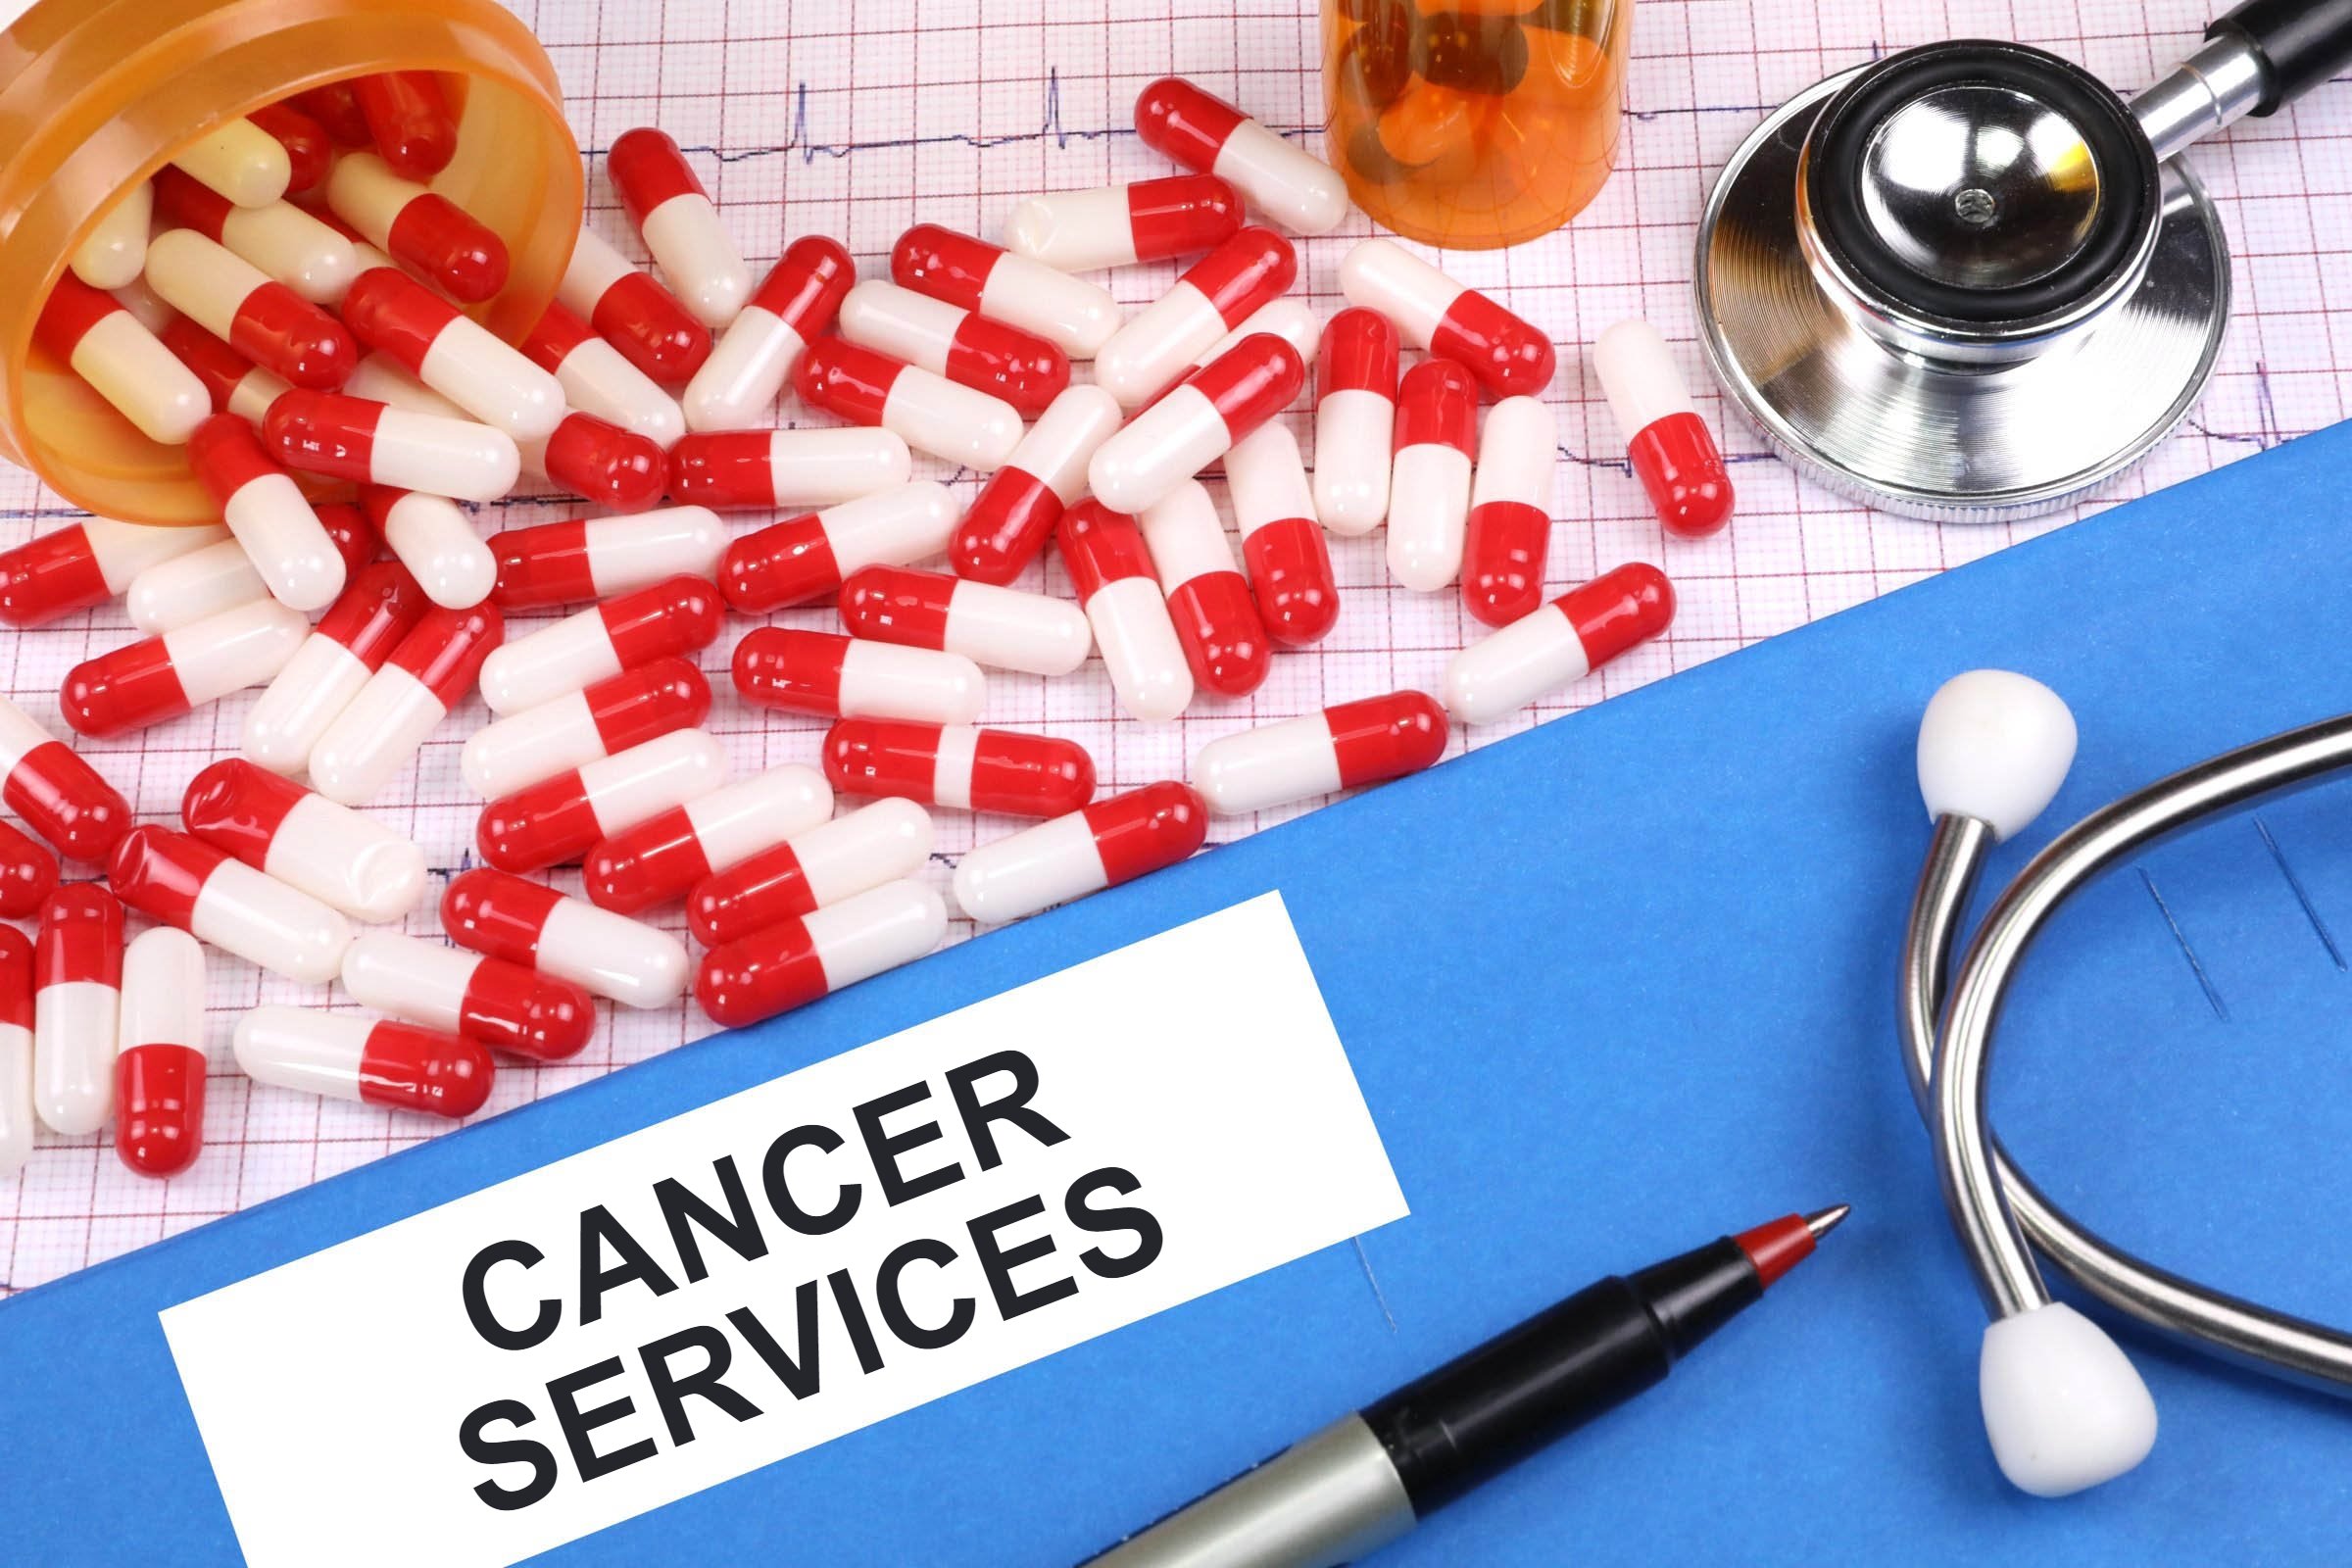 cancer services